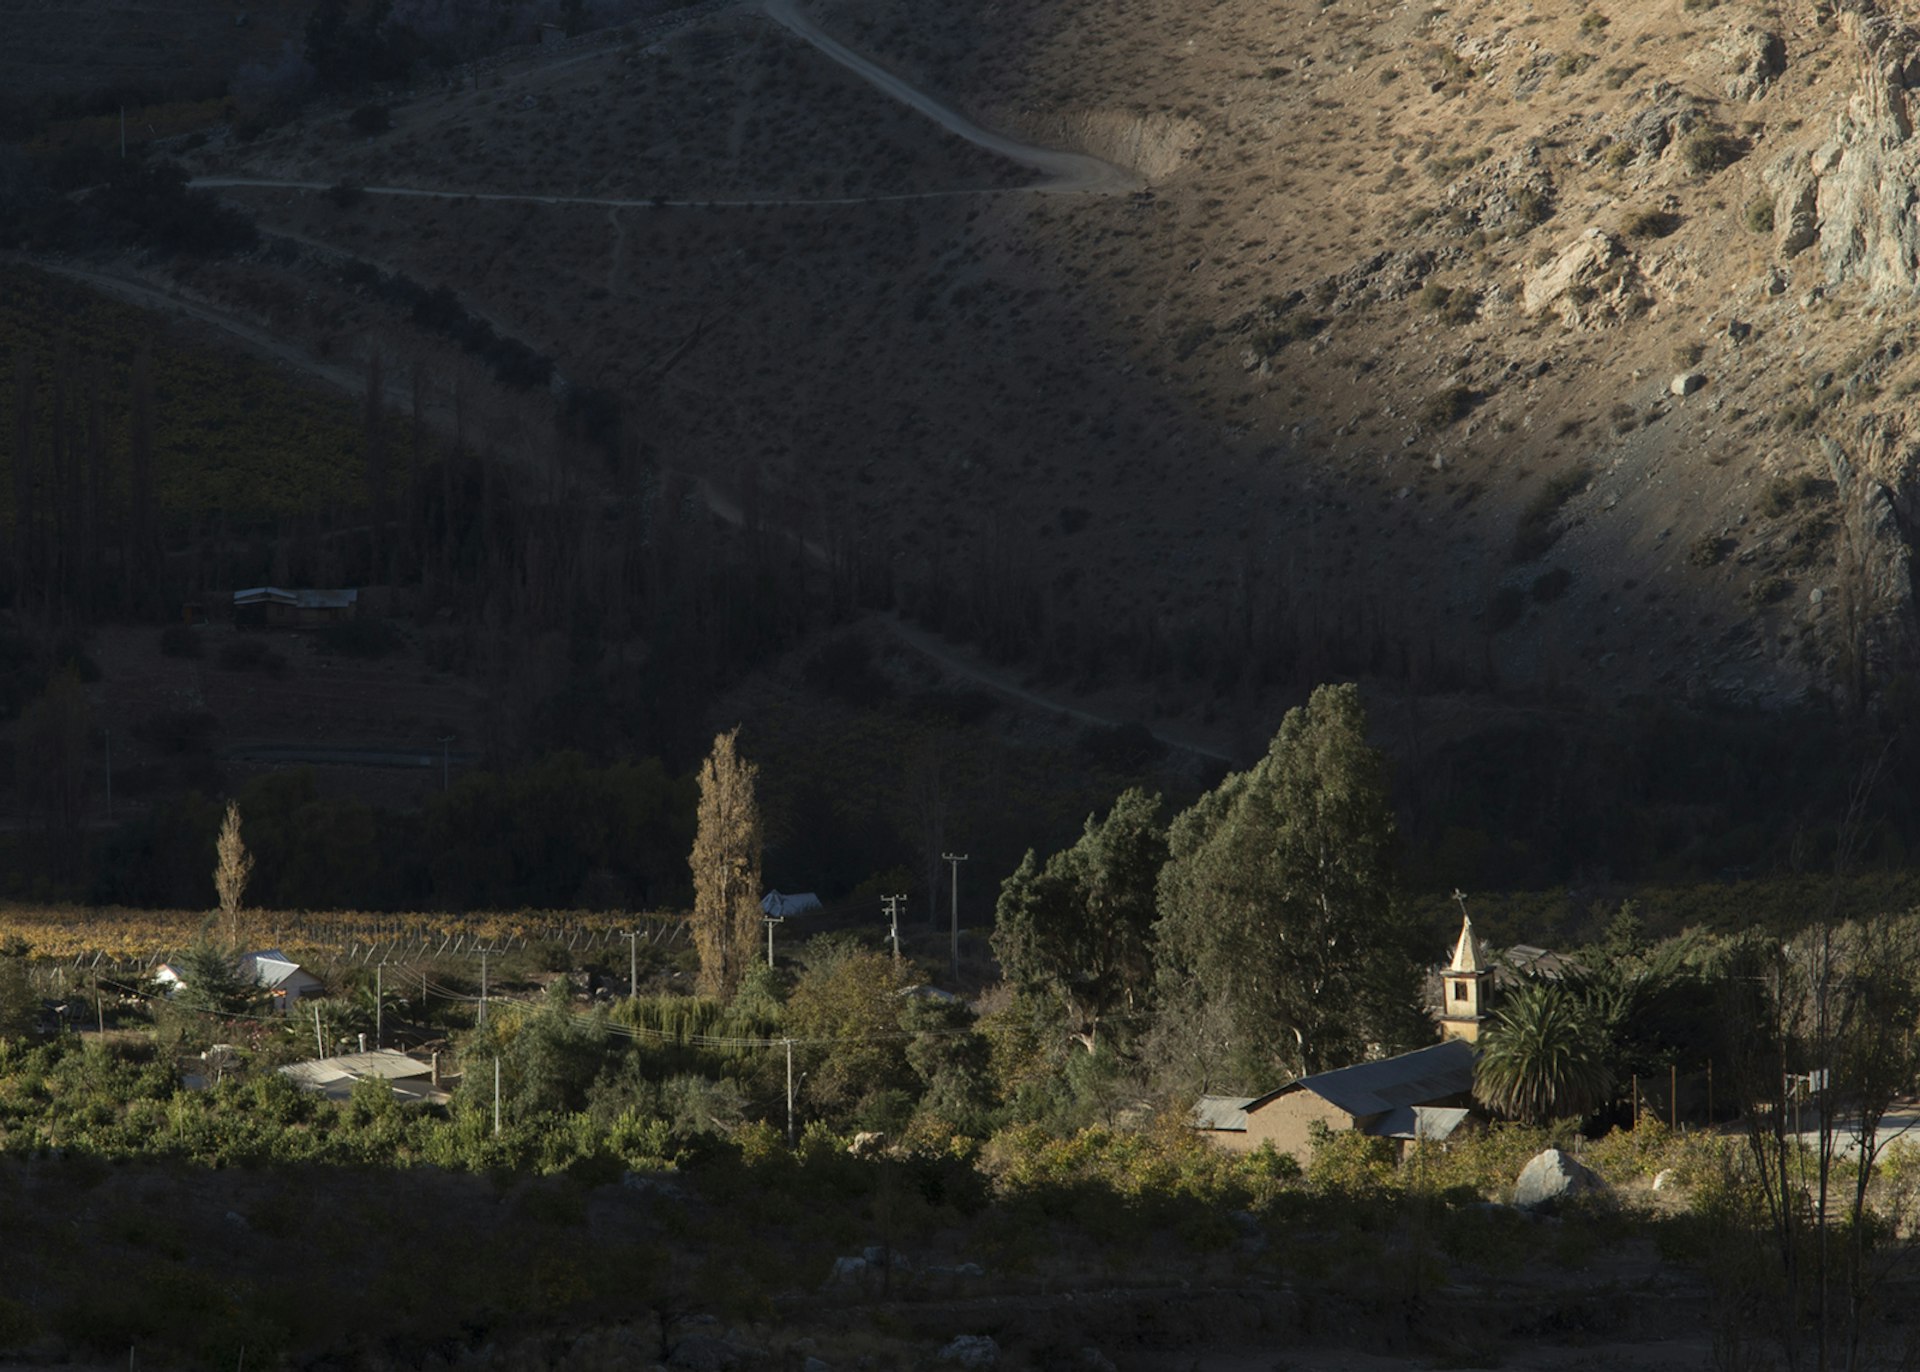 A church in Alcohuaz, a village in the Elqui Valley, Chile © Philip Lee Harvey / Lonely Planet